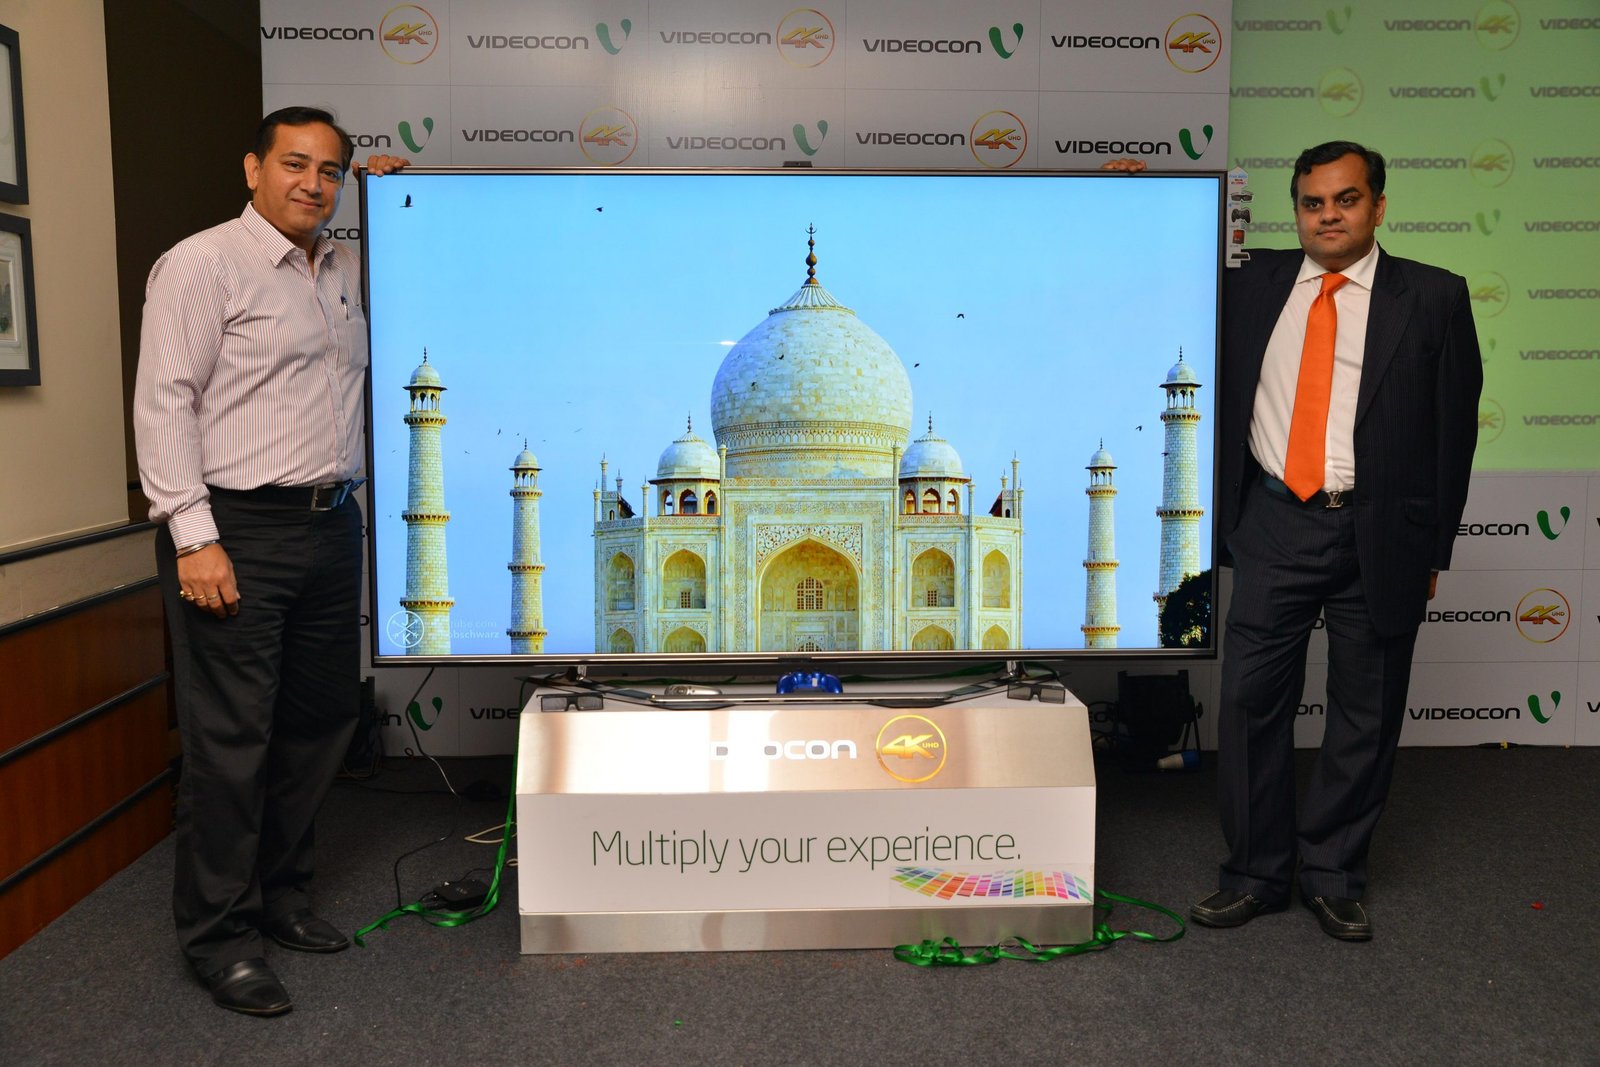 Fm L To R Mr. CM Singh COO Videocon and Mr. Anirudh Dhoot Director Videocon at the launch of Videocon 4K Ultra High Definition LED scaled